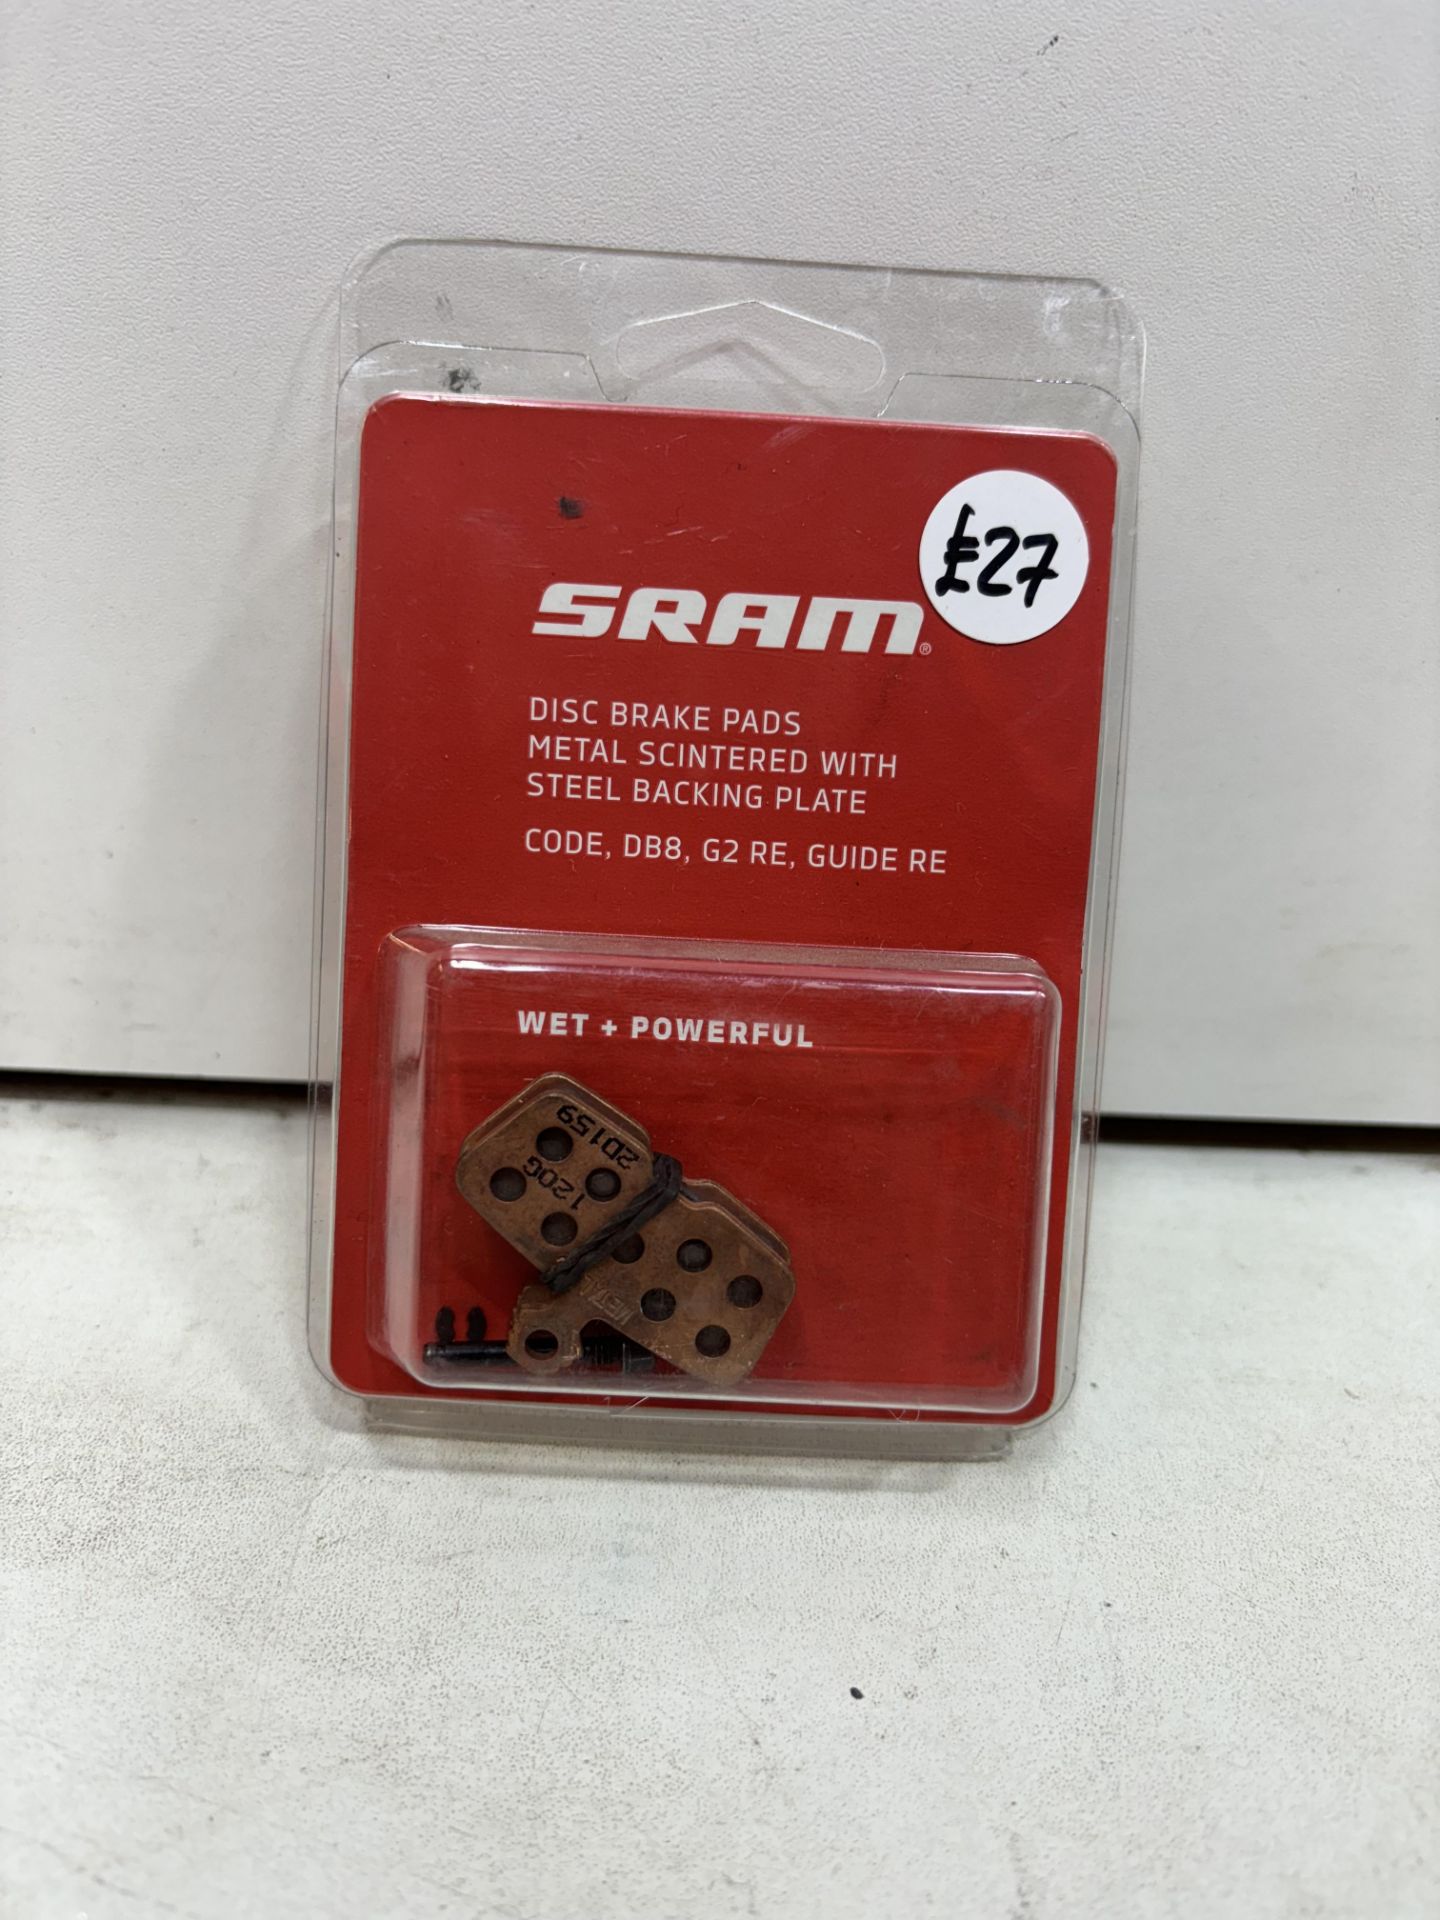 4 x SRAM Disc Brake Pads, Metal Scintered With Steel Backing Plate